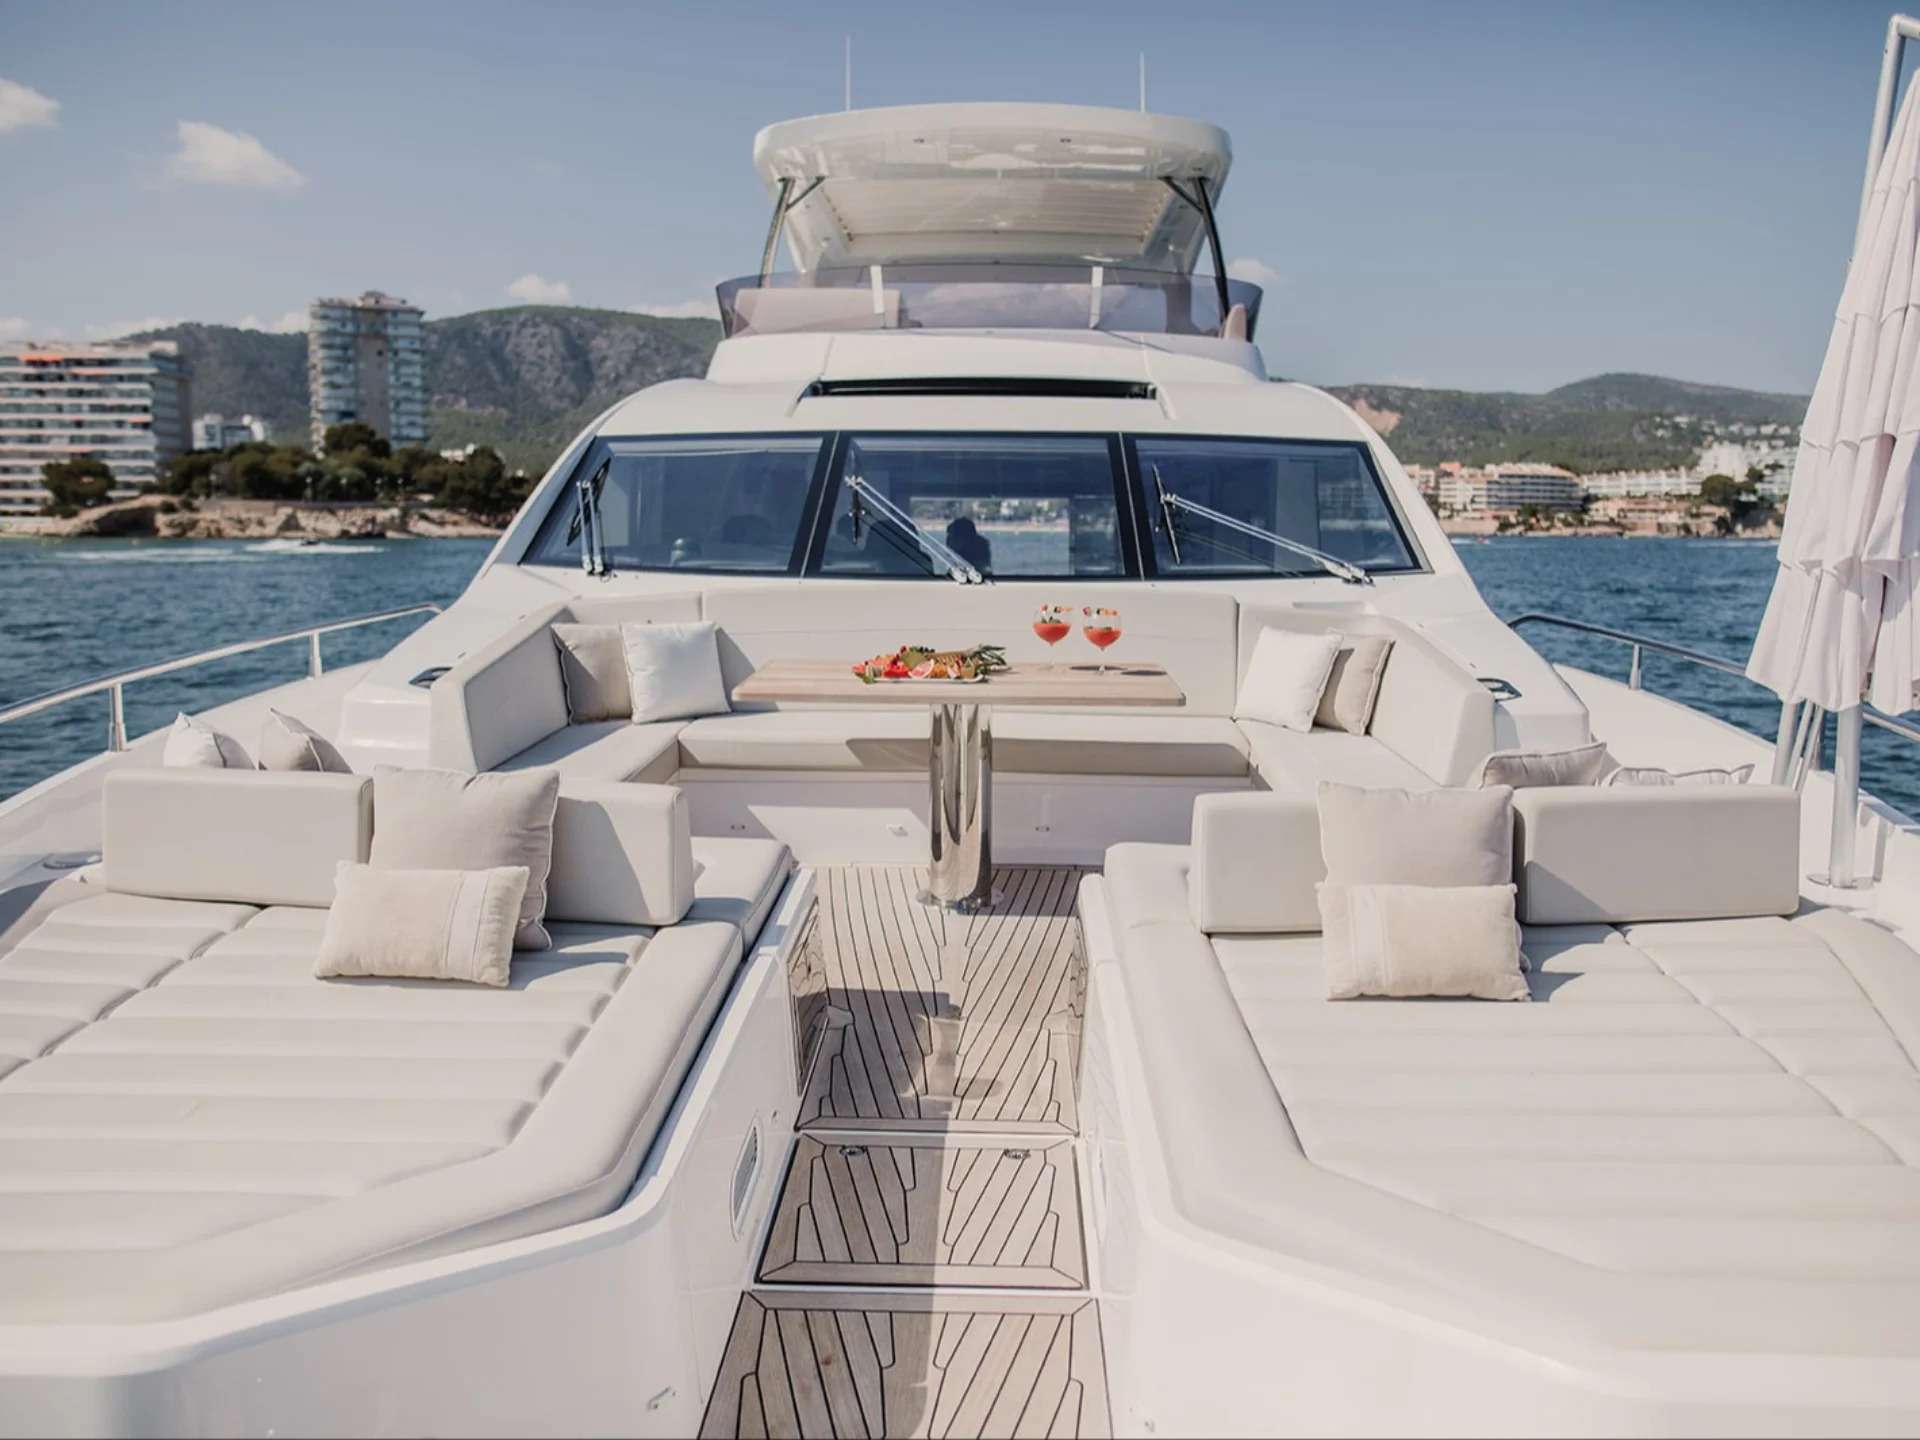 LADY M - Yacht Charter Vodice & Boat hire in W. Med -Naples/Sicily, W. Med -Riviera/Cors/Sard., W. Med - Spain/Balearics 4